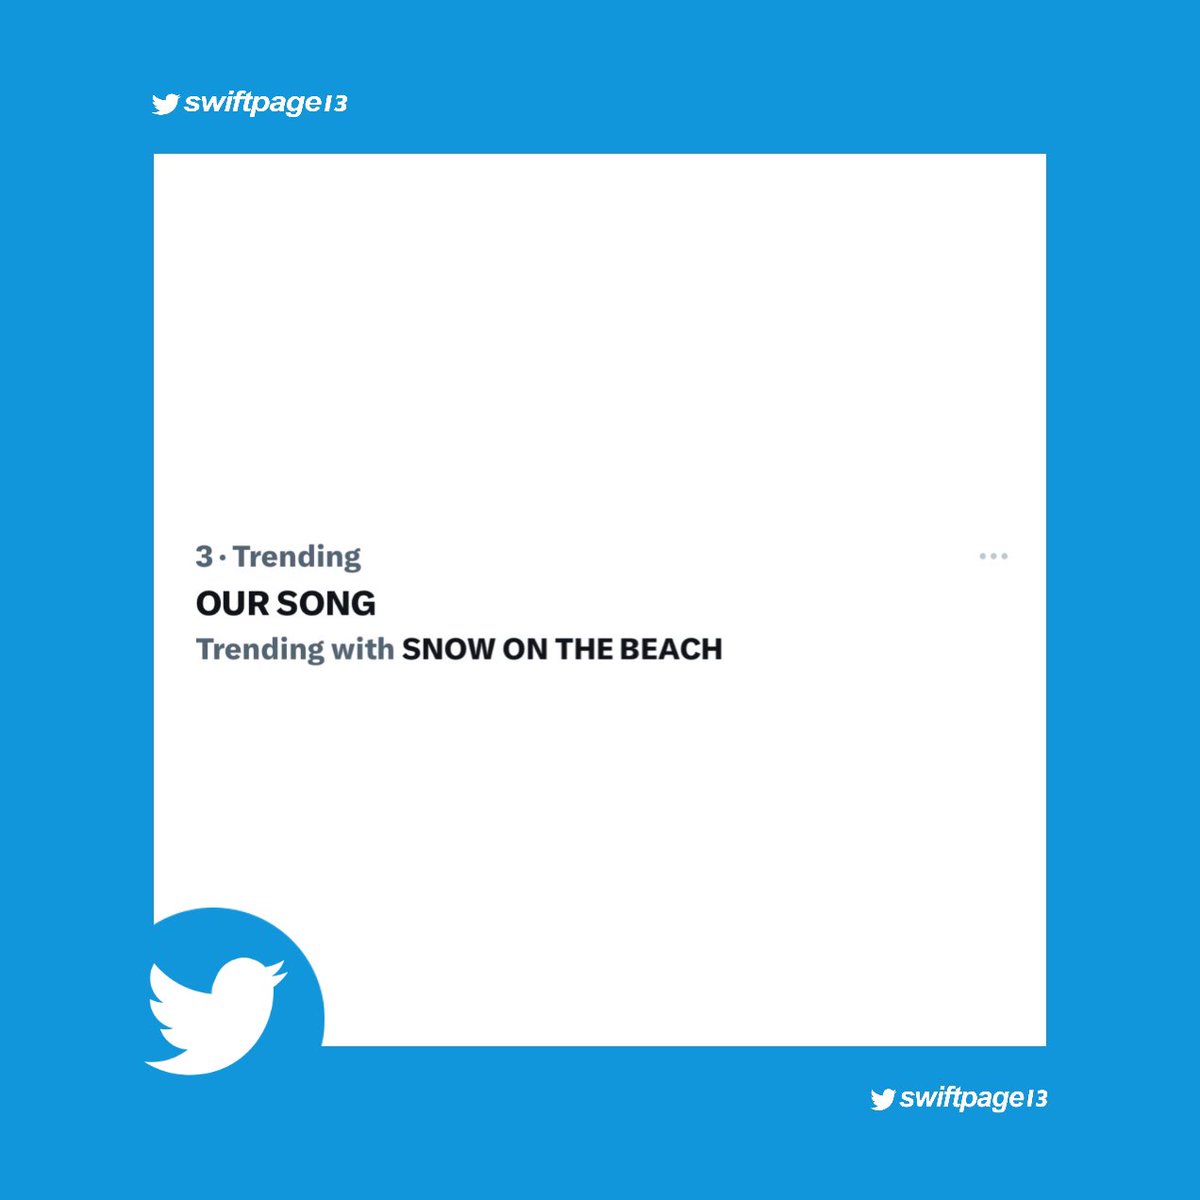 🇺🇸#OURSONG is trending #3 on Twitter US